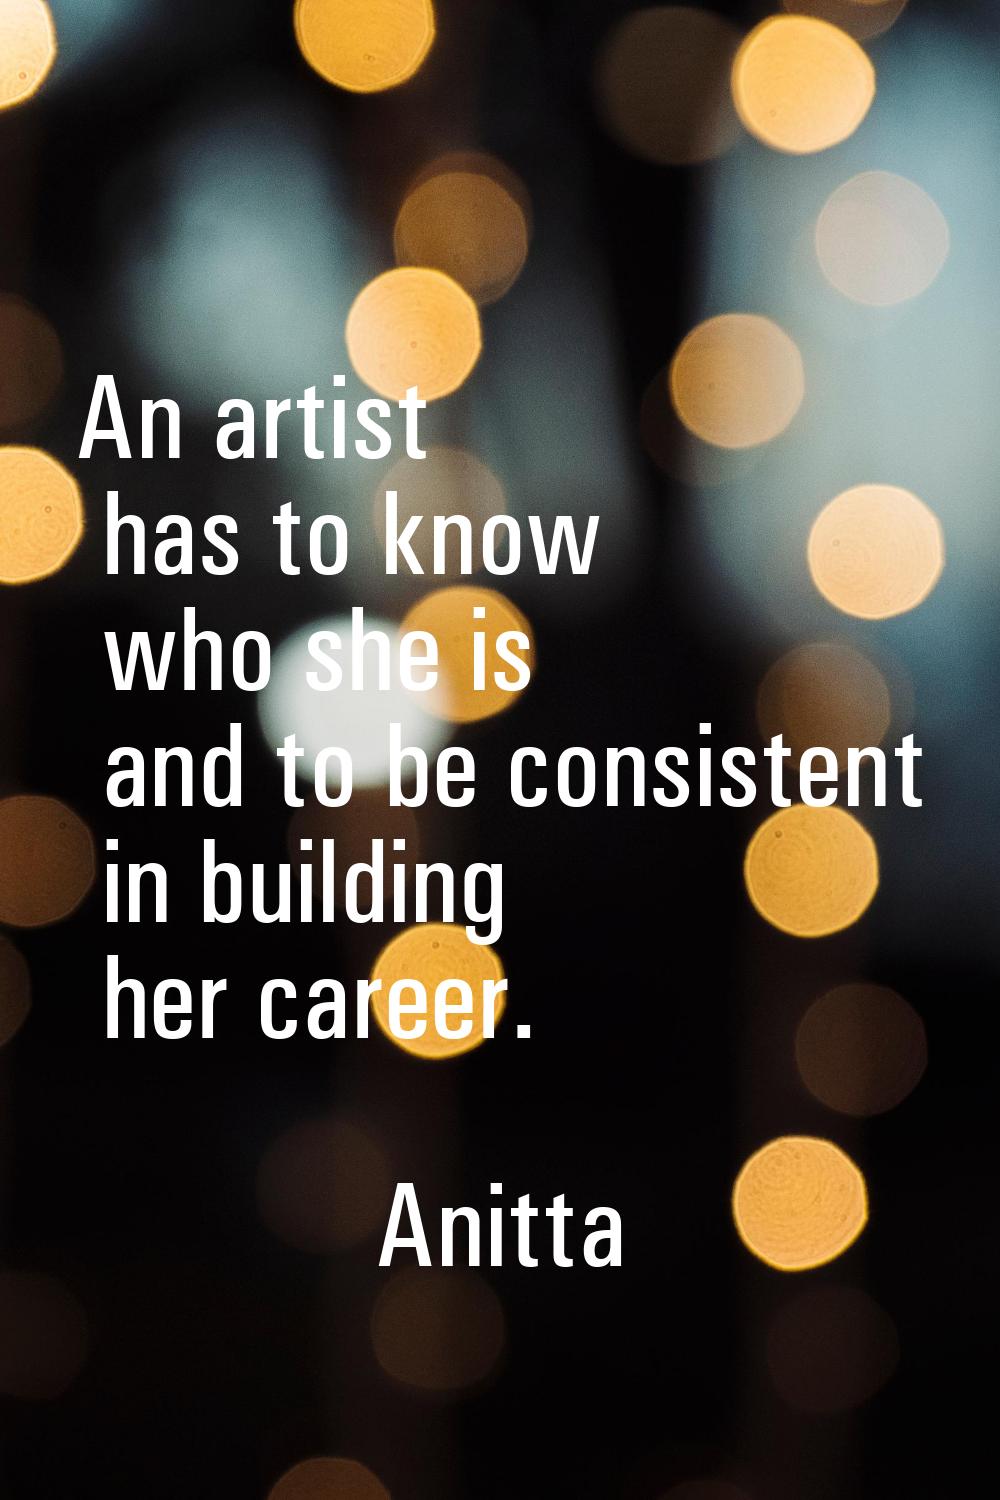 An artist has to know who she is and to be consistent in building her career.